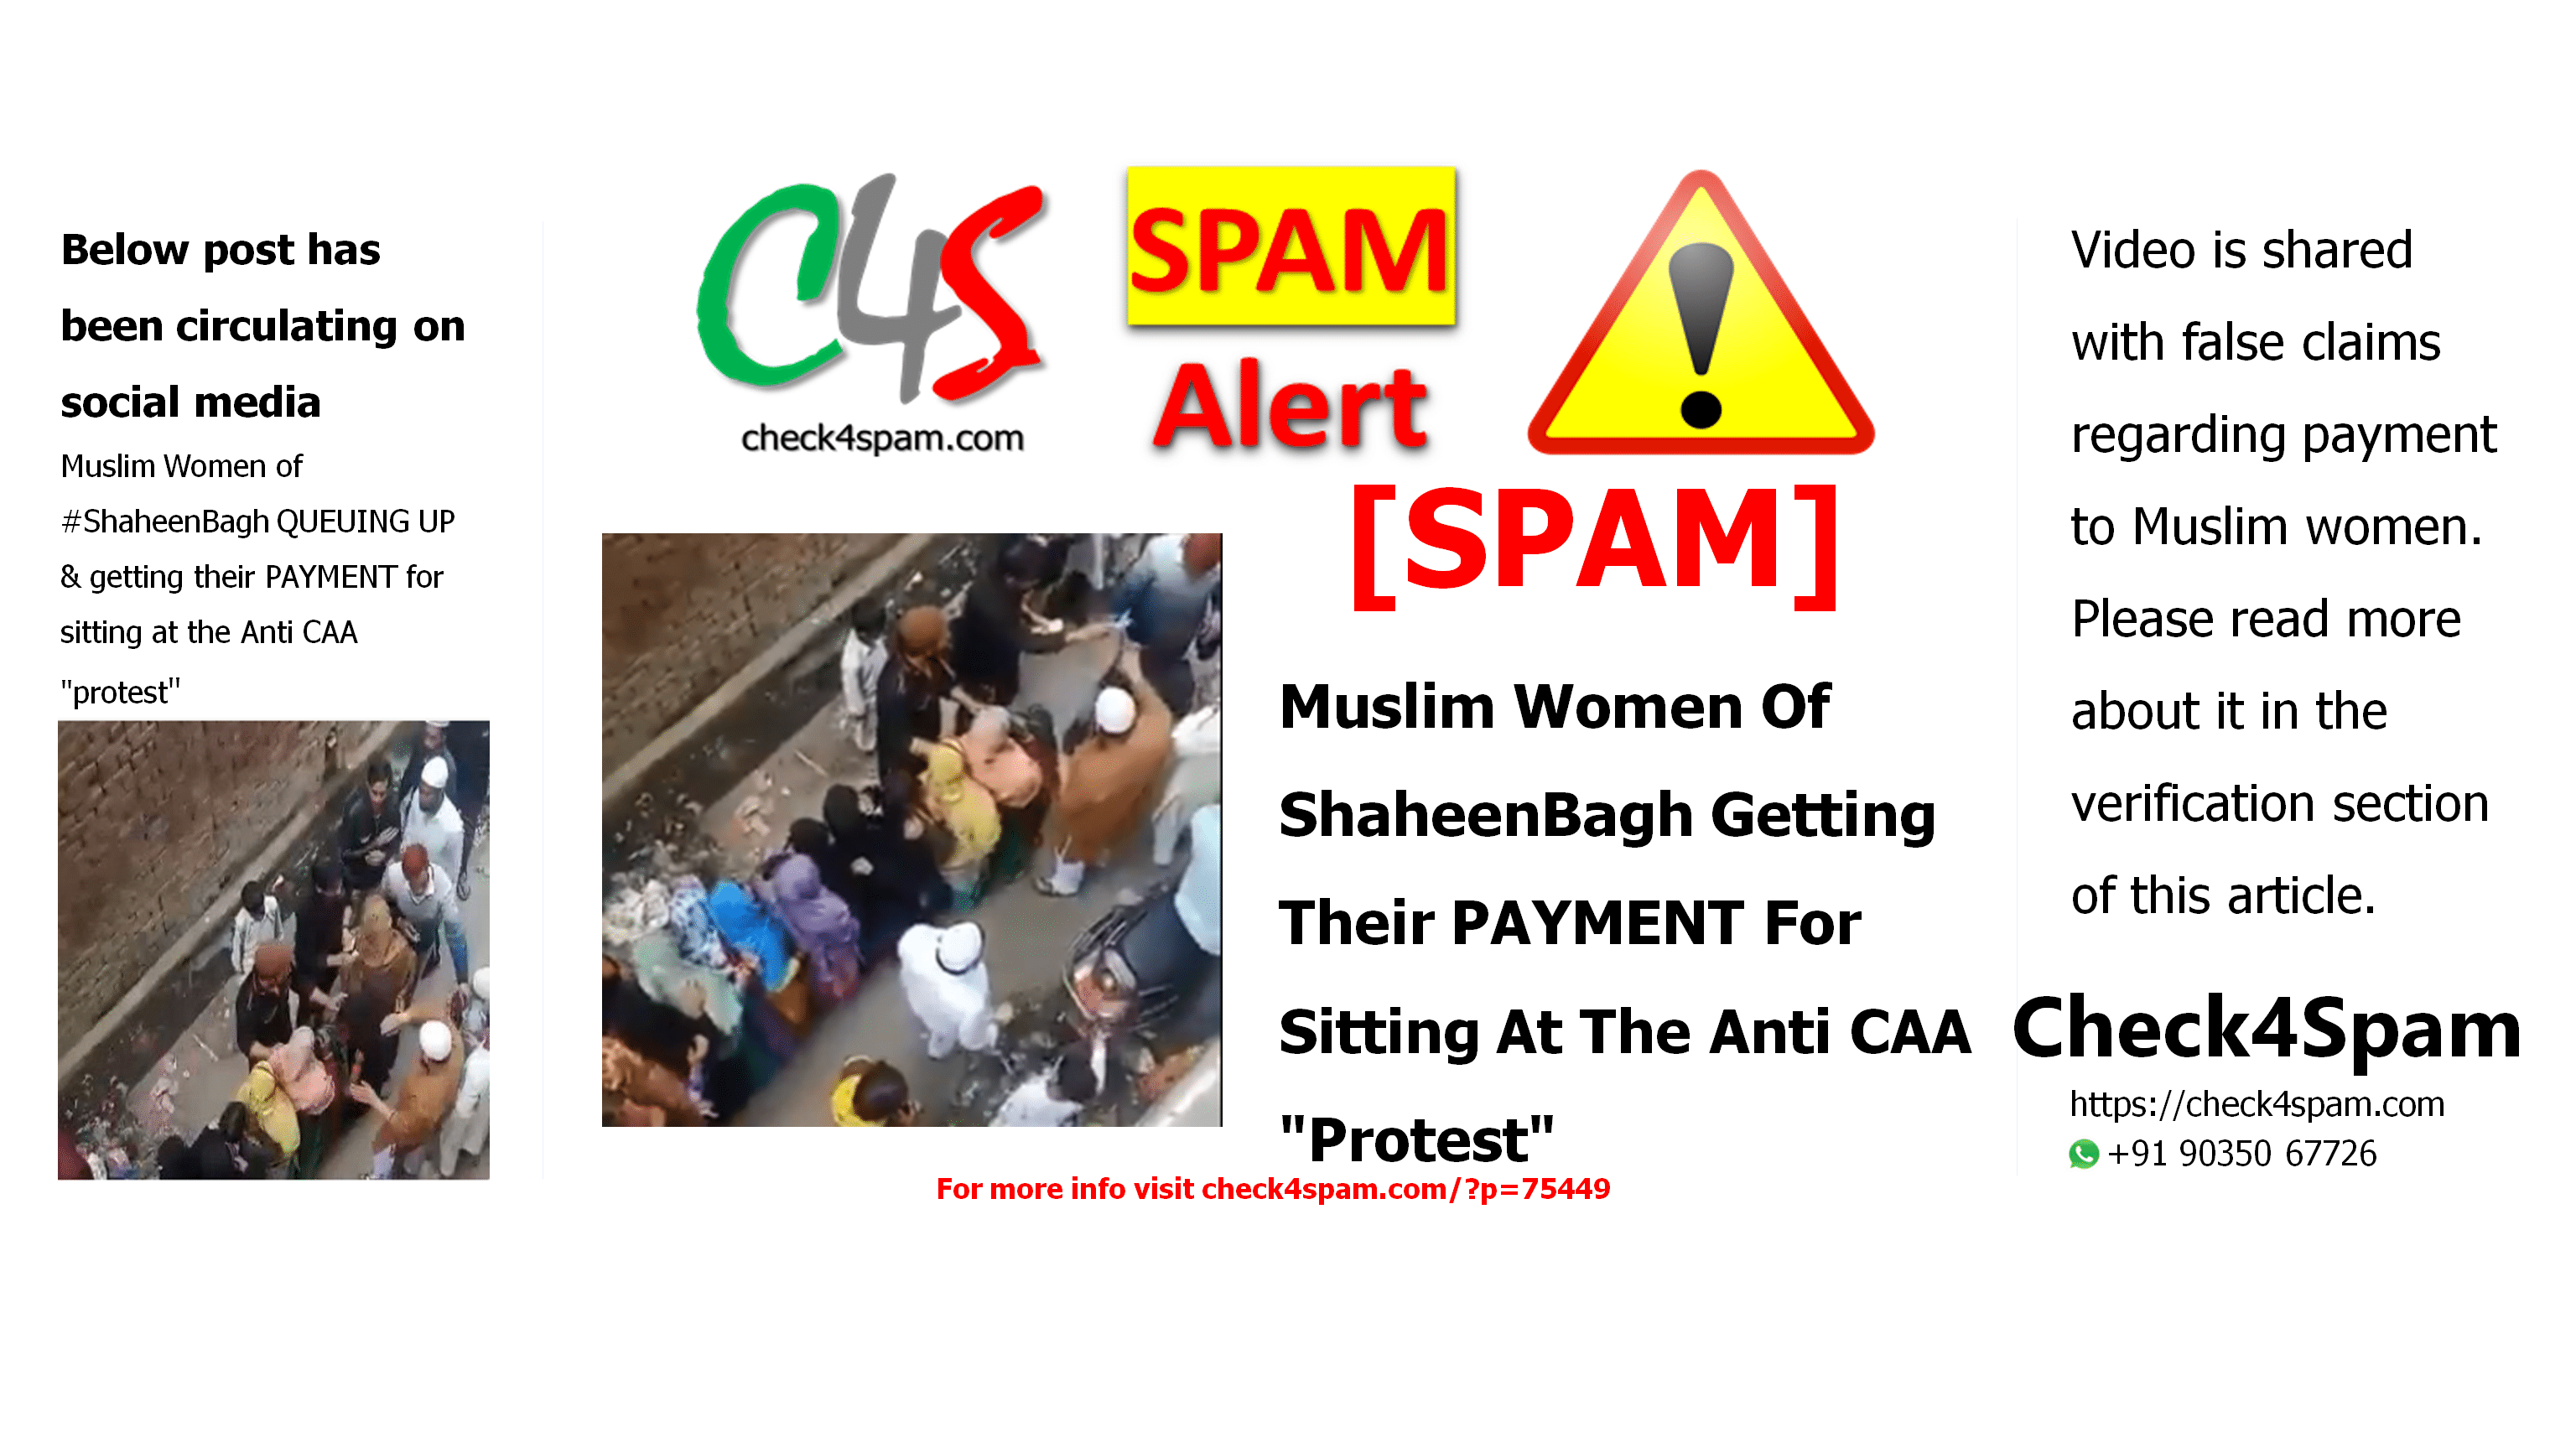 Muslim Women Of Shaheen Bagh Getting Their PAYMENT For Sitting At The Anti CAA "Protest"